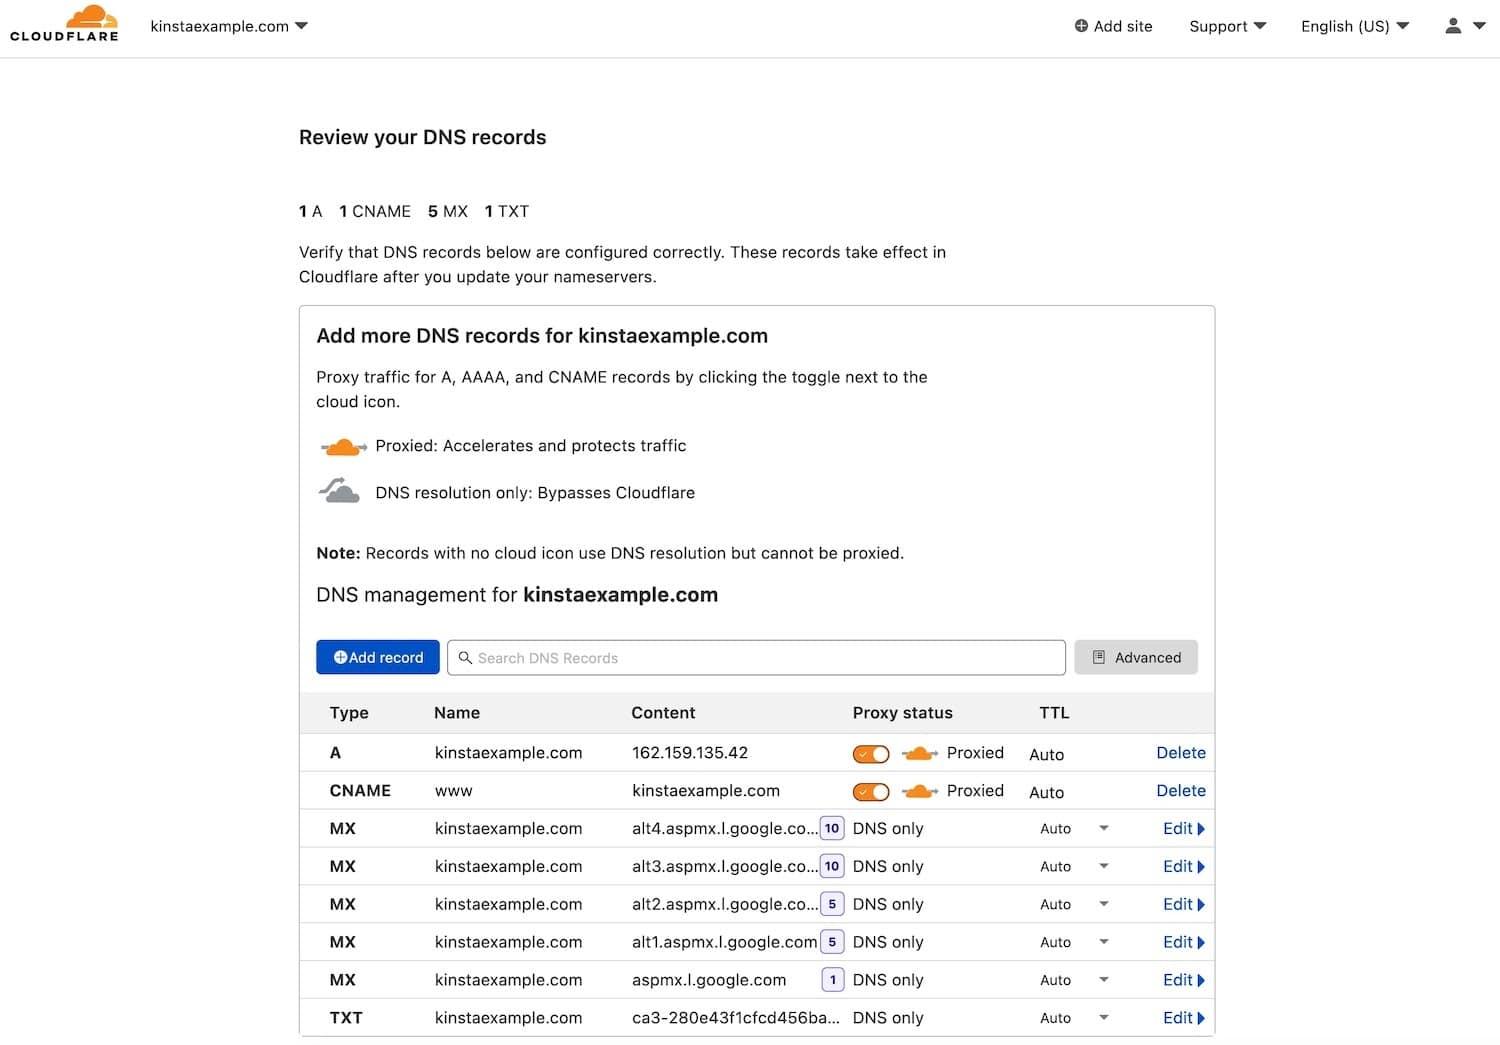 Reviewing DNS records for a newly added domain in Cloudflare.